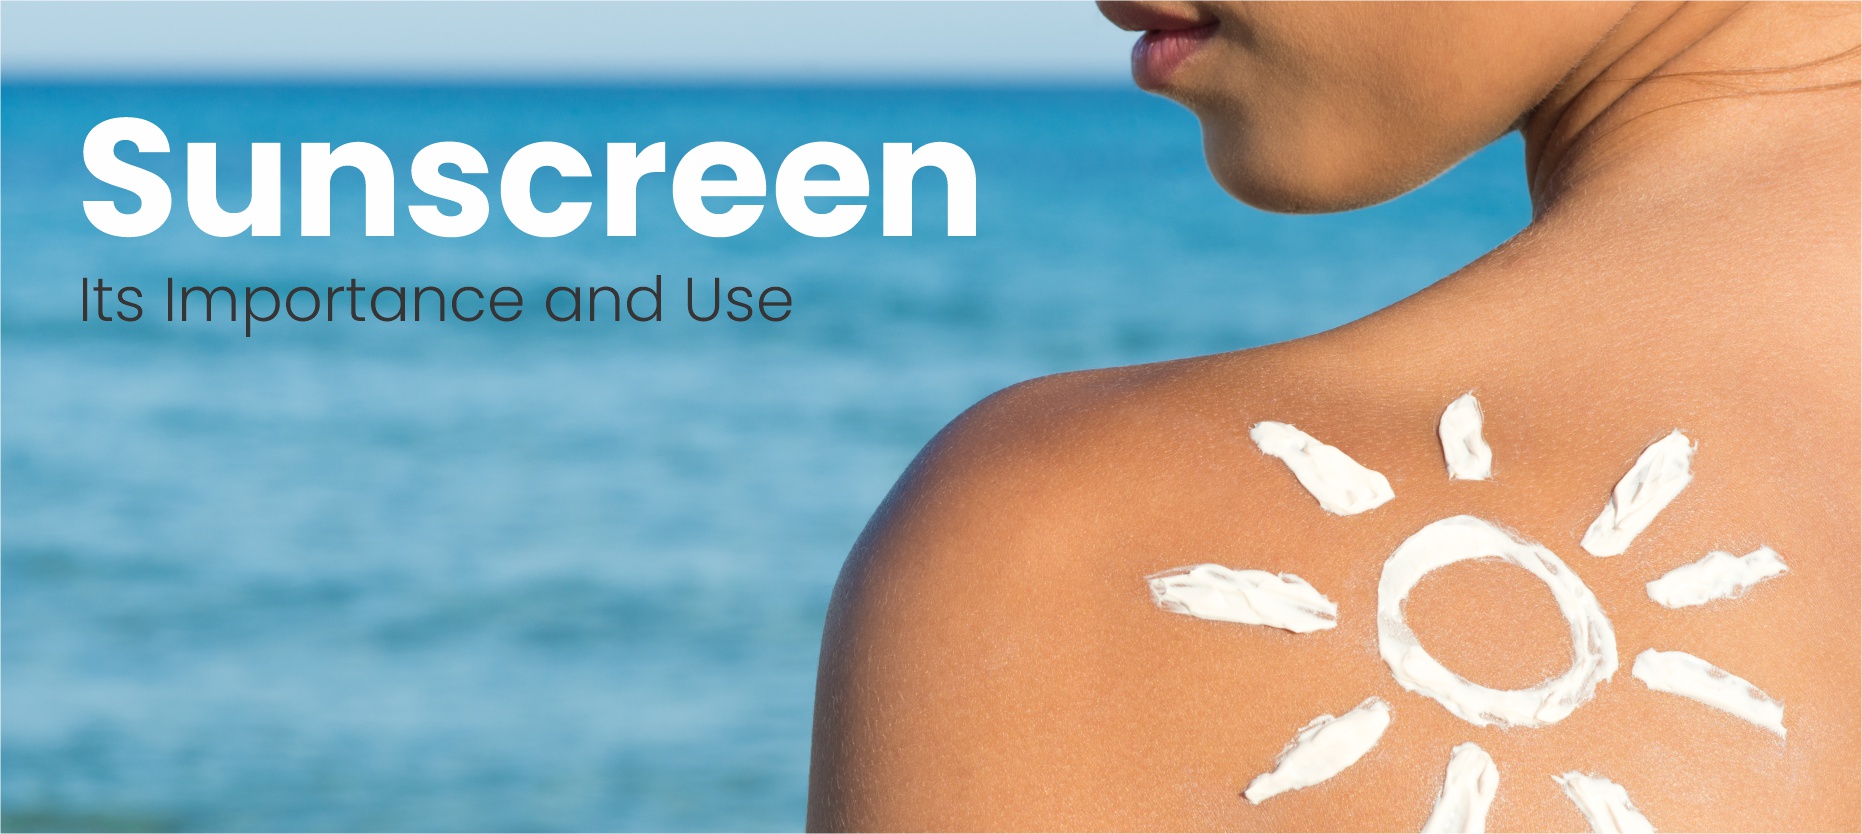 Sunscreen: Its Importance and Use